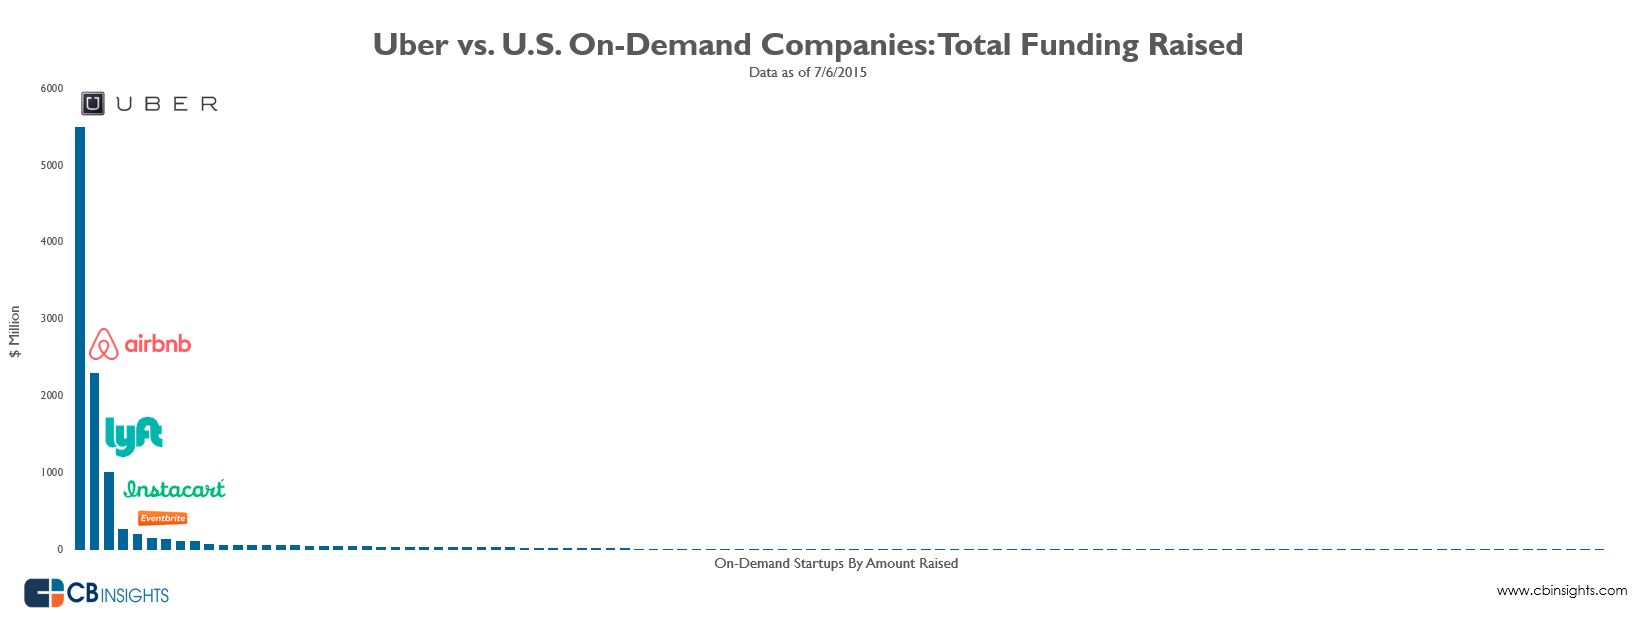 Uber has raised $5.5B - nearly as much as all other US on-demand startups combined